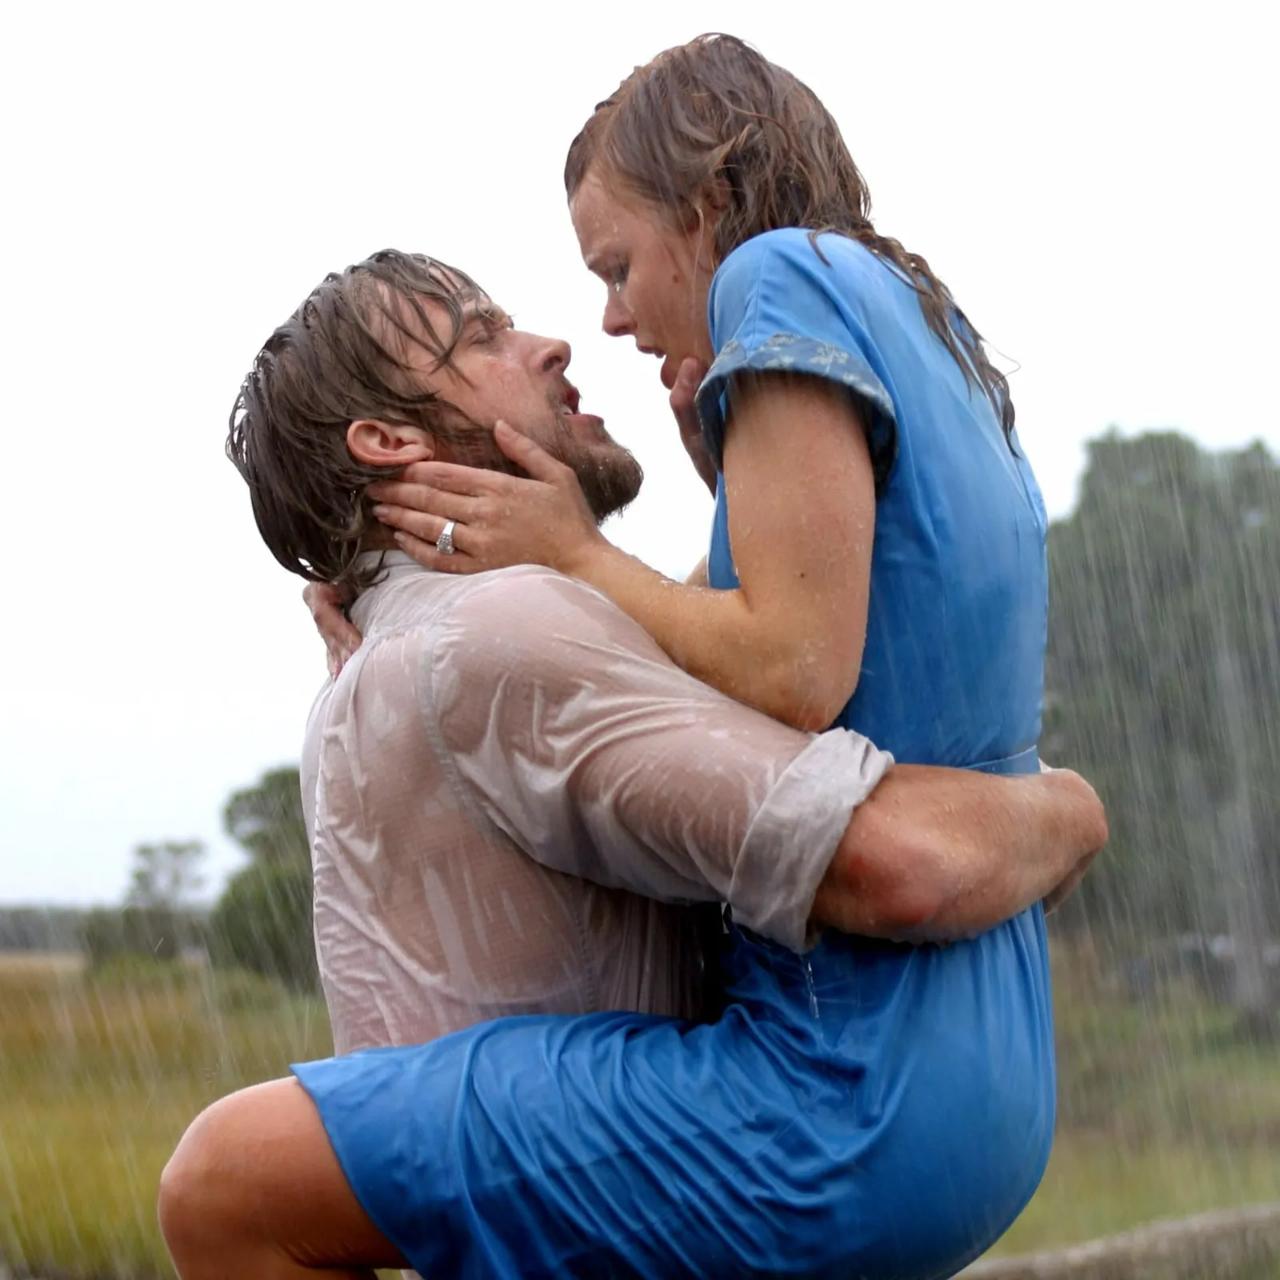 The Notebook
The Notebook is perhaps one of the first iconic movies that comes to mind when you think of rainy day romance. In a powerful scene, Allie (Rachel McAdams) confronts Noah (Ryan Gosling) about why he didn't write to her for seven years However, Noah reveals that he wrote to her every day for a year, insisting that their love is still alive. The passionate kiss that follows says it all